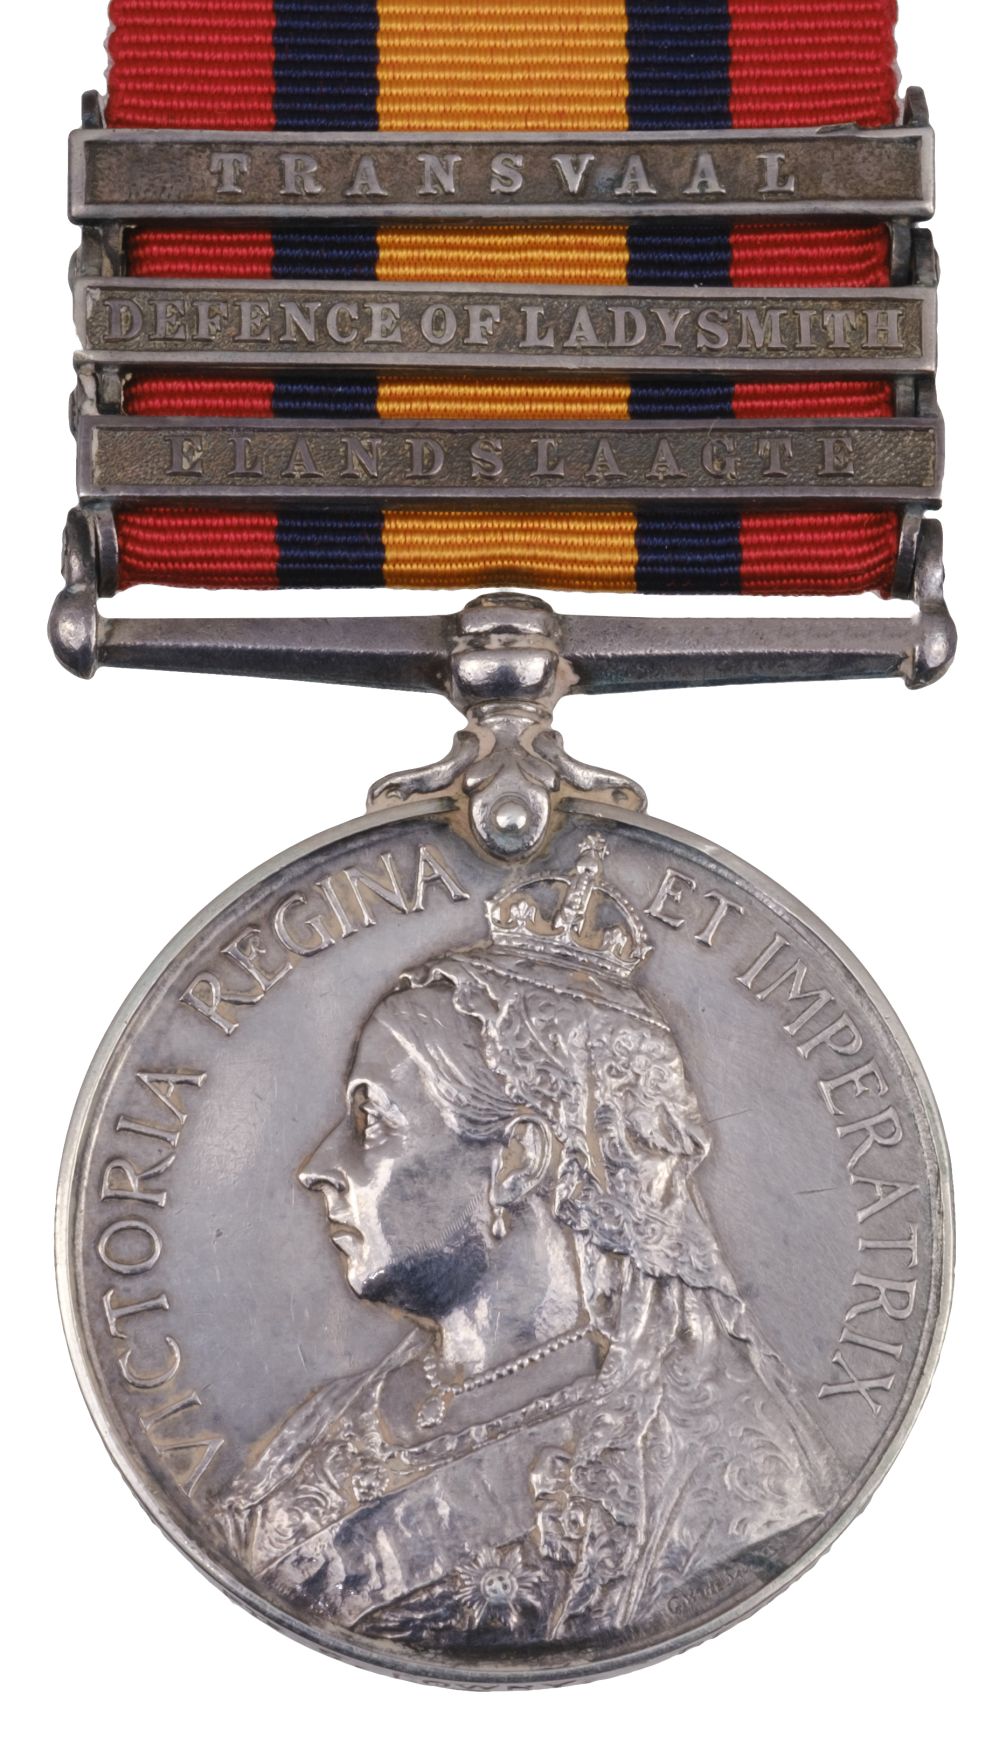 Queen's South Africa Medal 1899-1902, 3 clasps (4400 Pte S. Lowry, Devon: Regt)